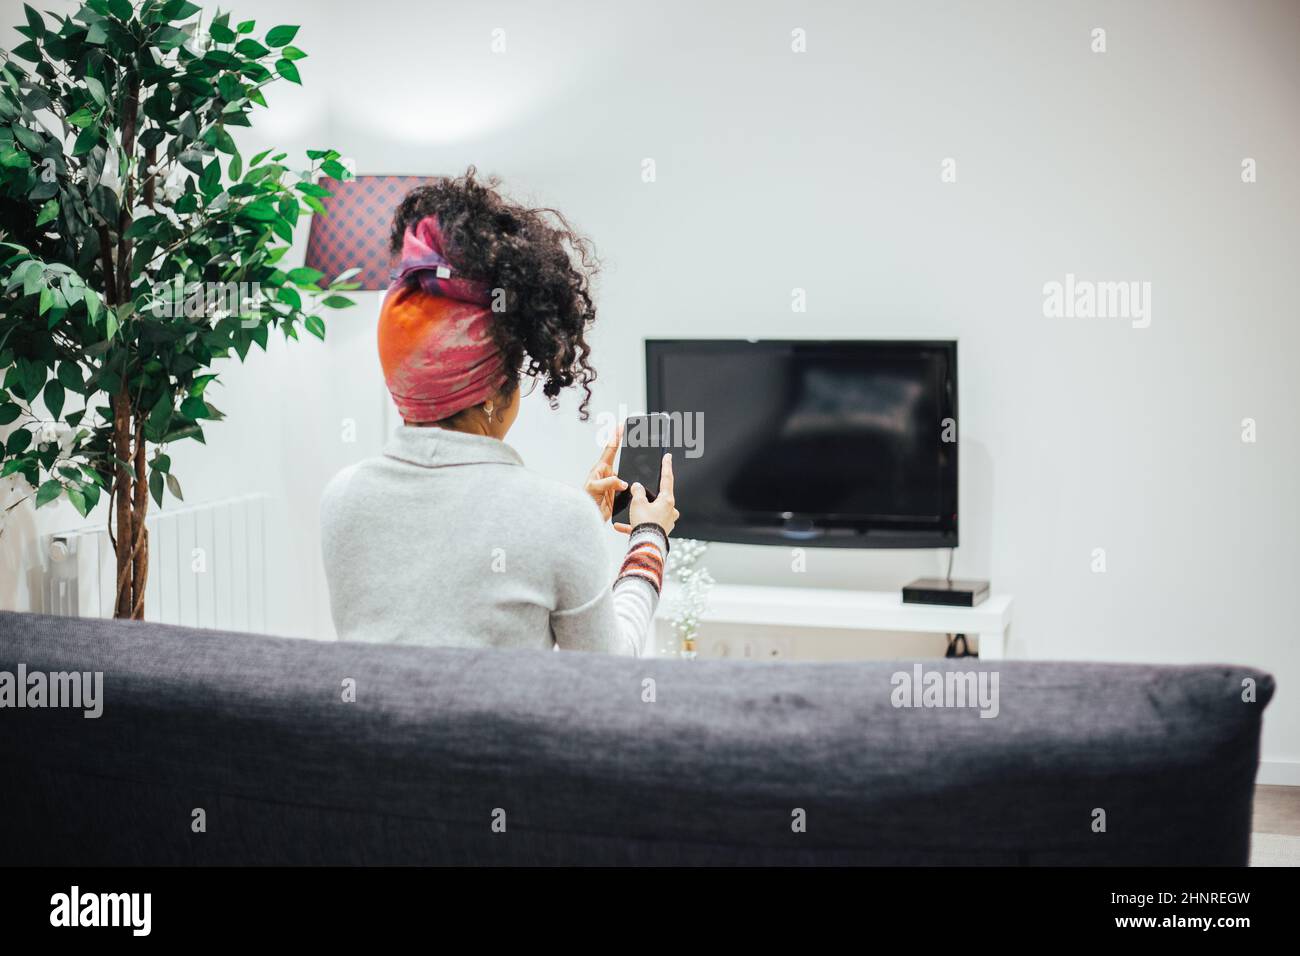 Afro woman using her cell phone in comfort of her home Stock Photo